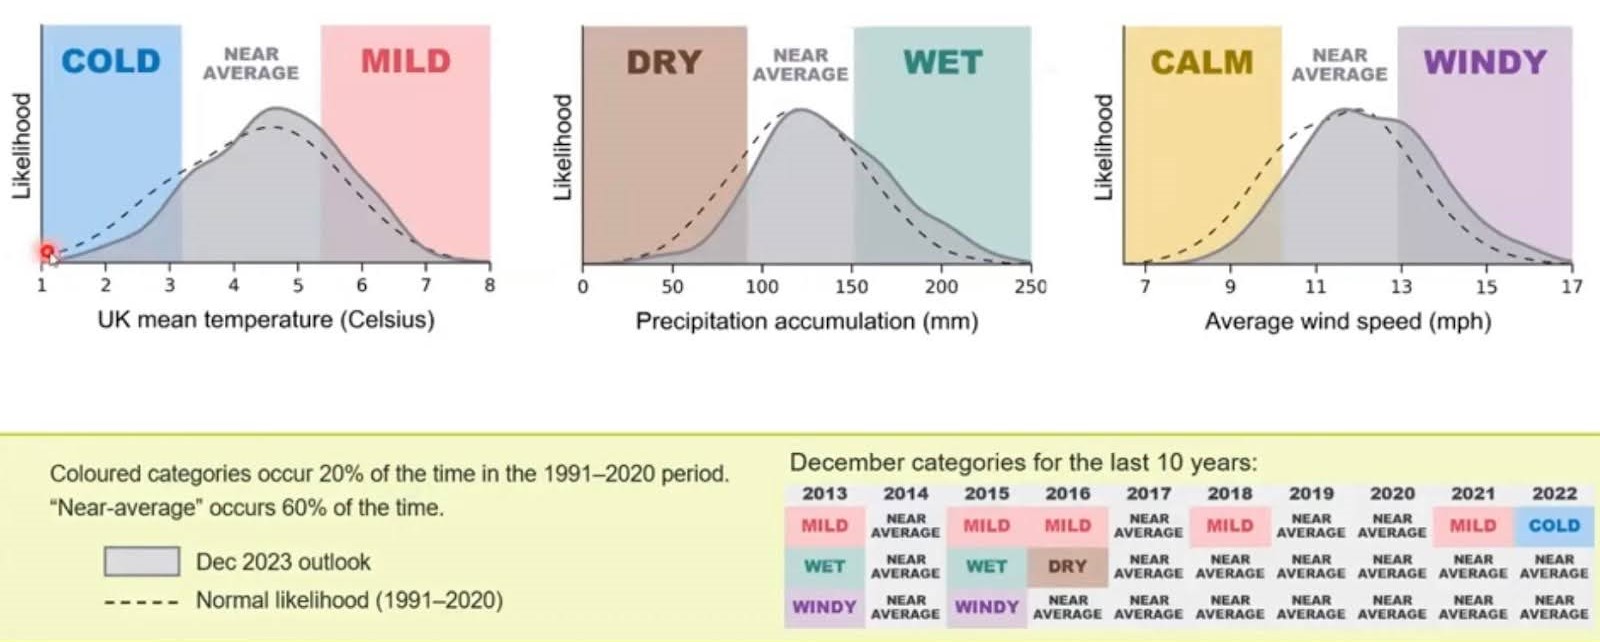 Probability distributions for UK mean temperature, precipitation and wind speed, for December 2023. Source: Met Office, November 2023.